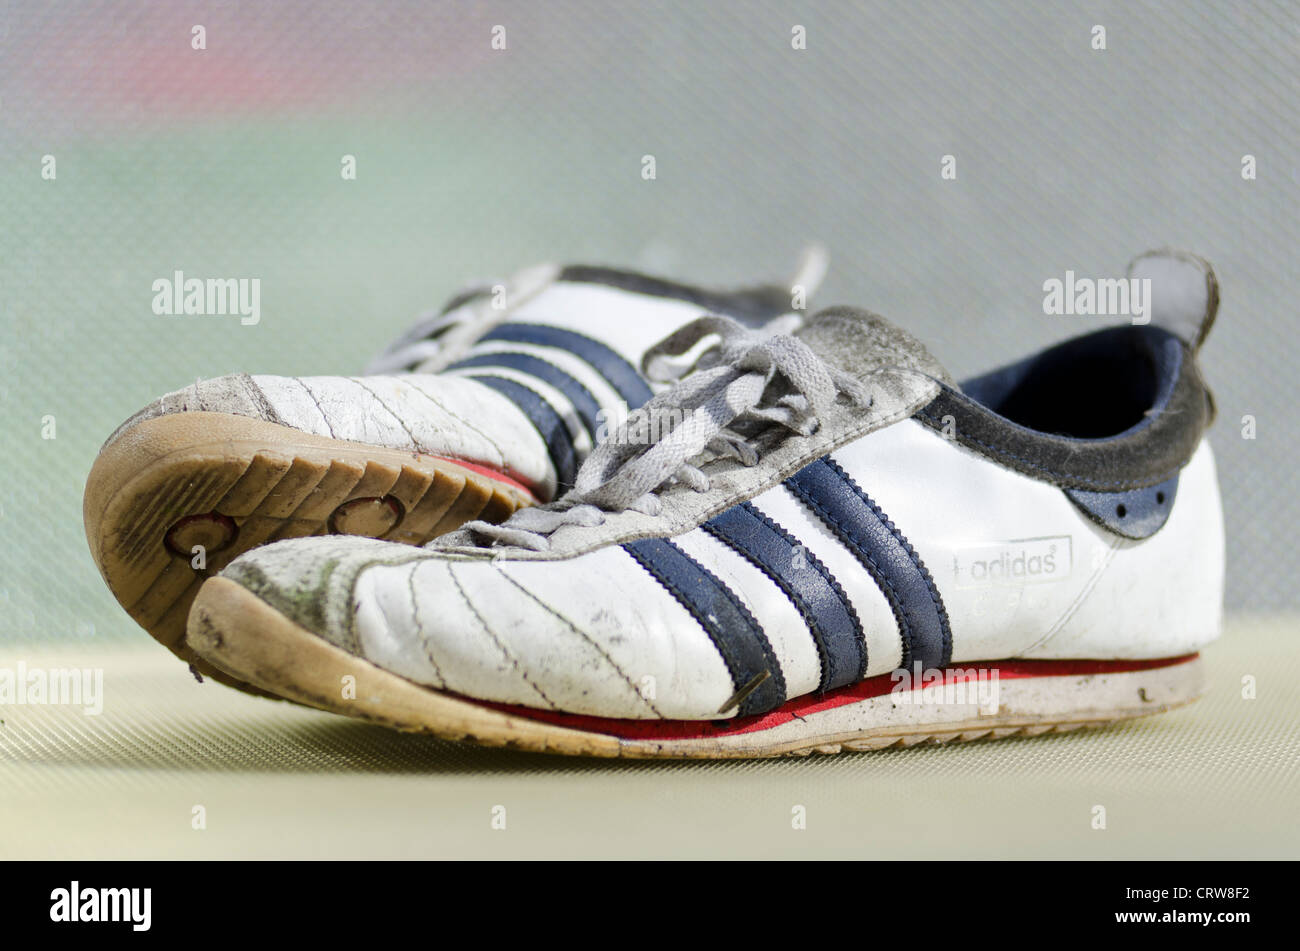 adidas cup 68 sneakers